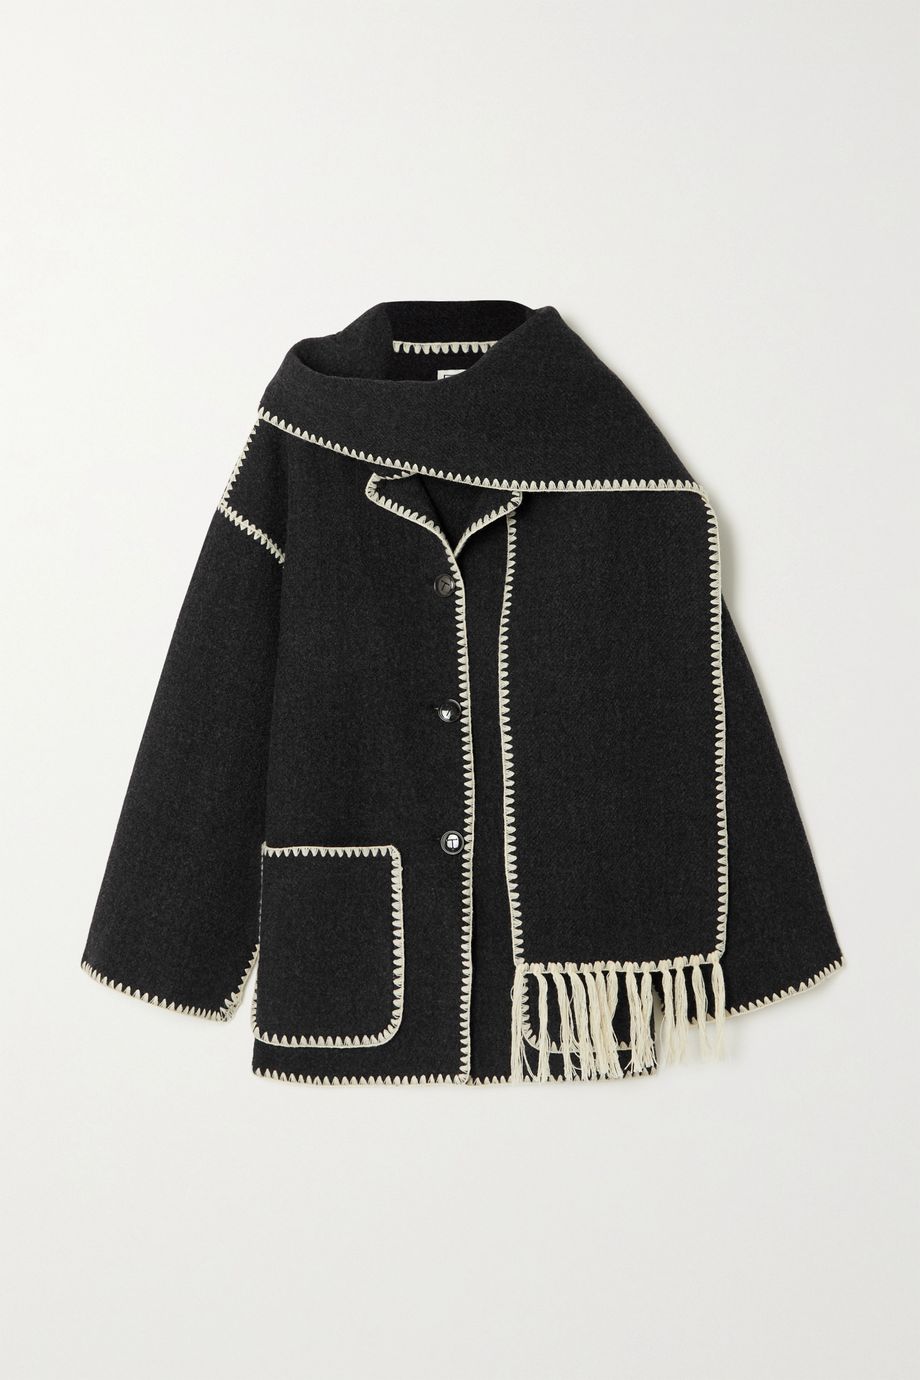 Toteme's Scarf Jacket Is Back in Stock for Winter | Who What Wear UK